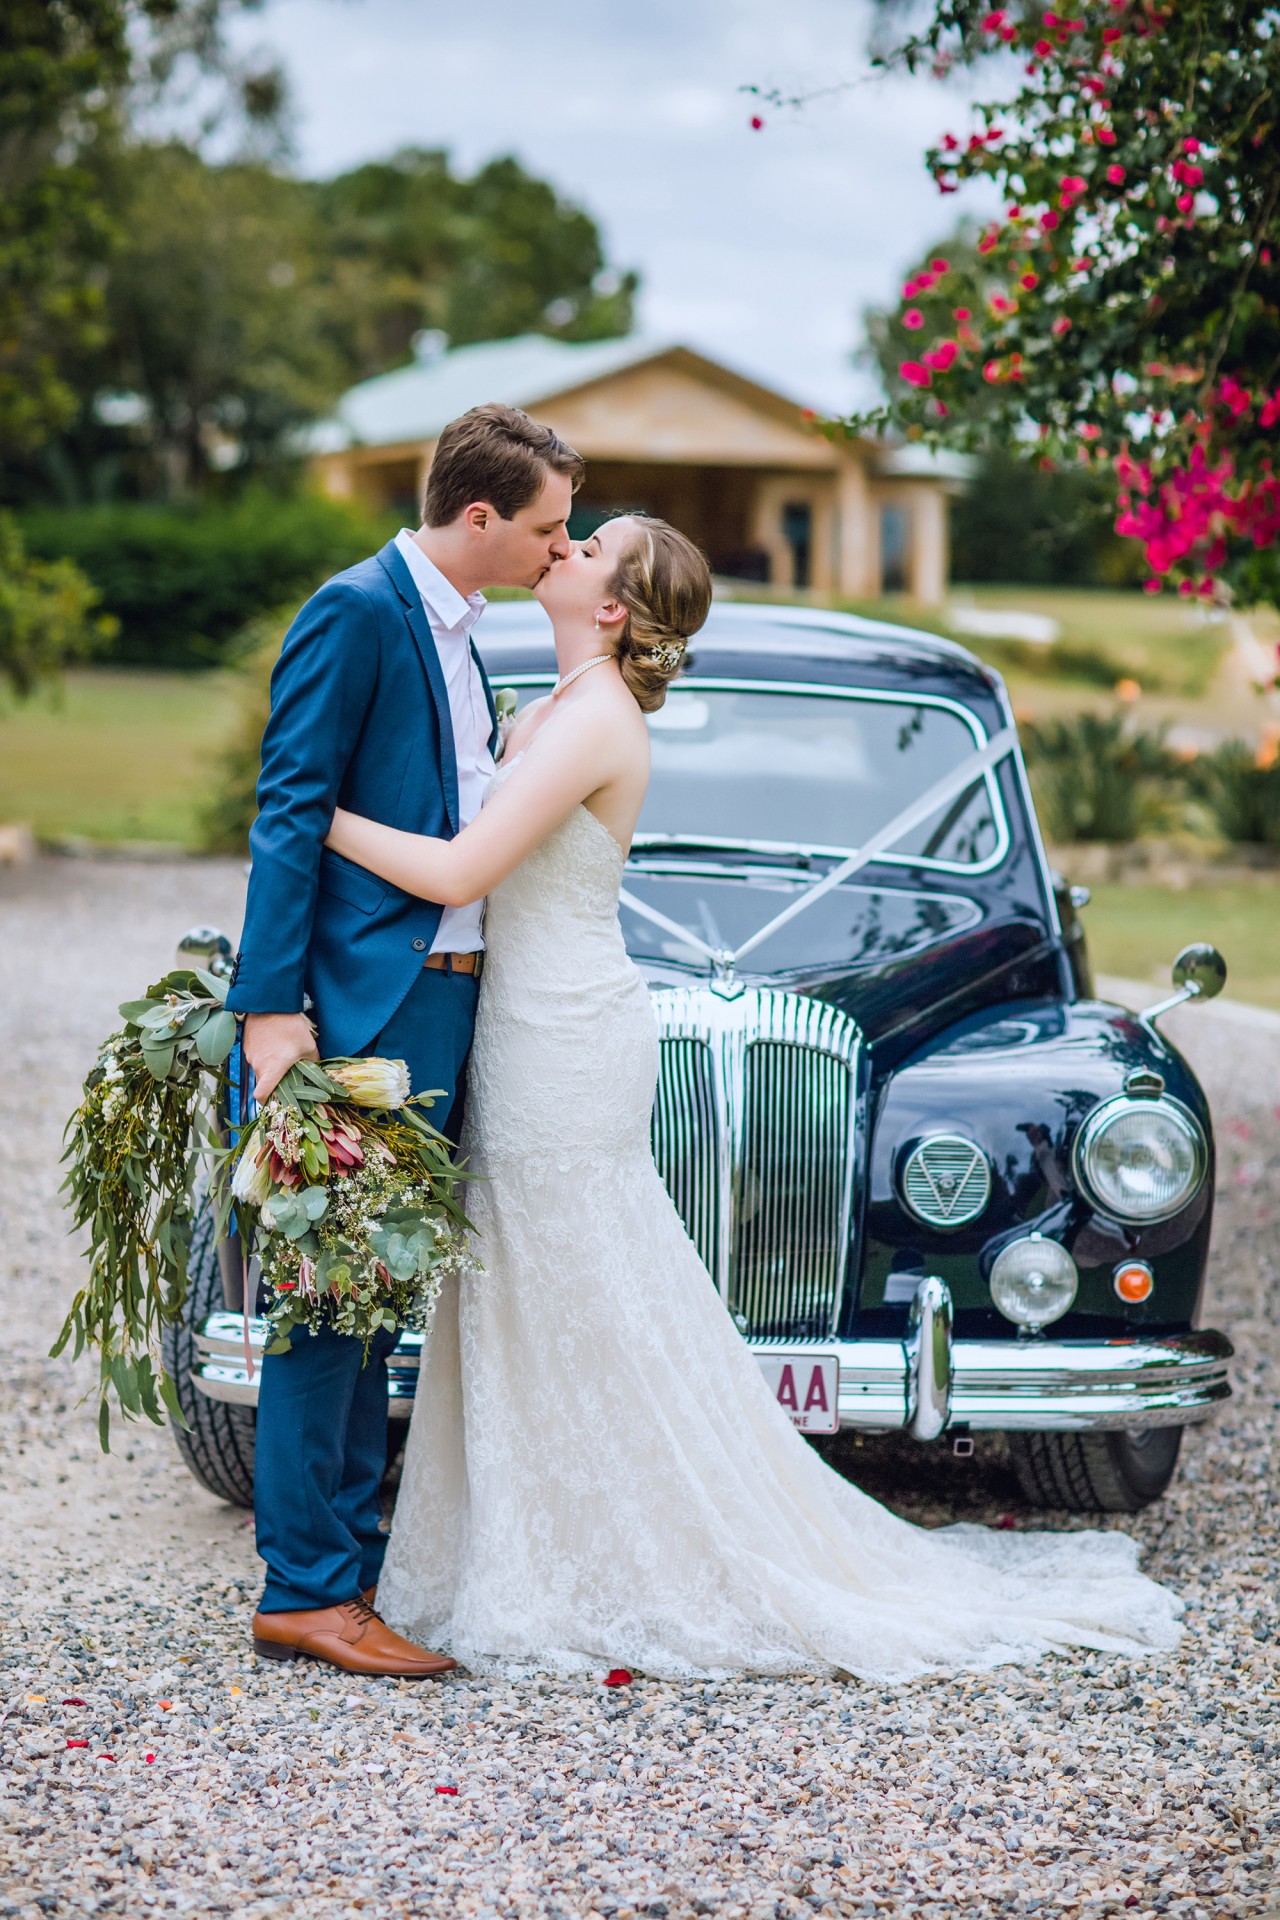 popular months and seasons to get married Madelyn_Daniel_Rustic-Australian-Wedding